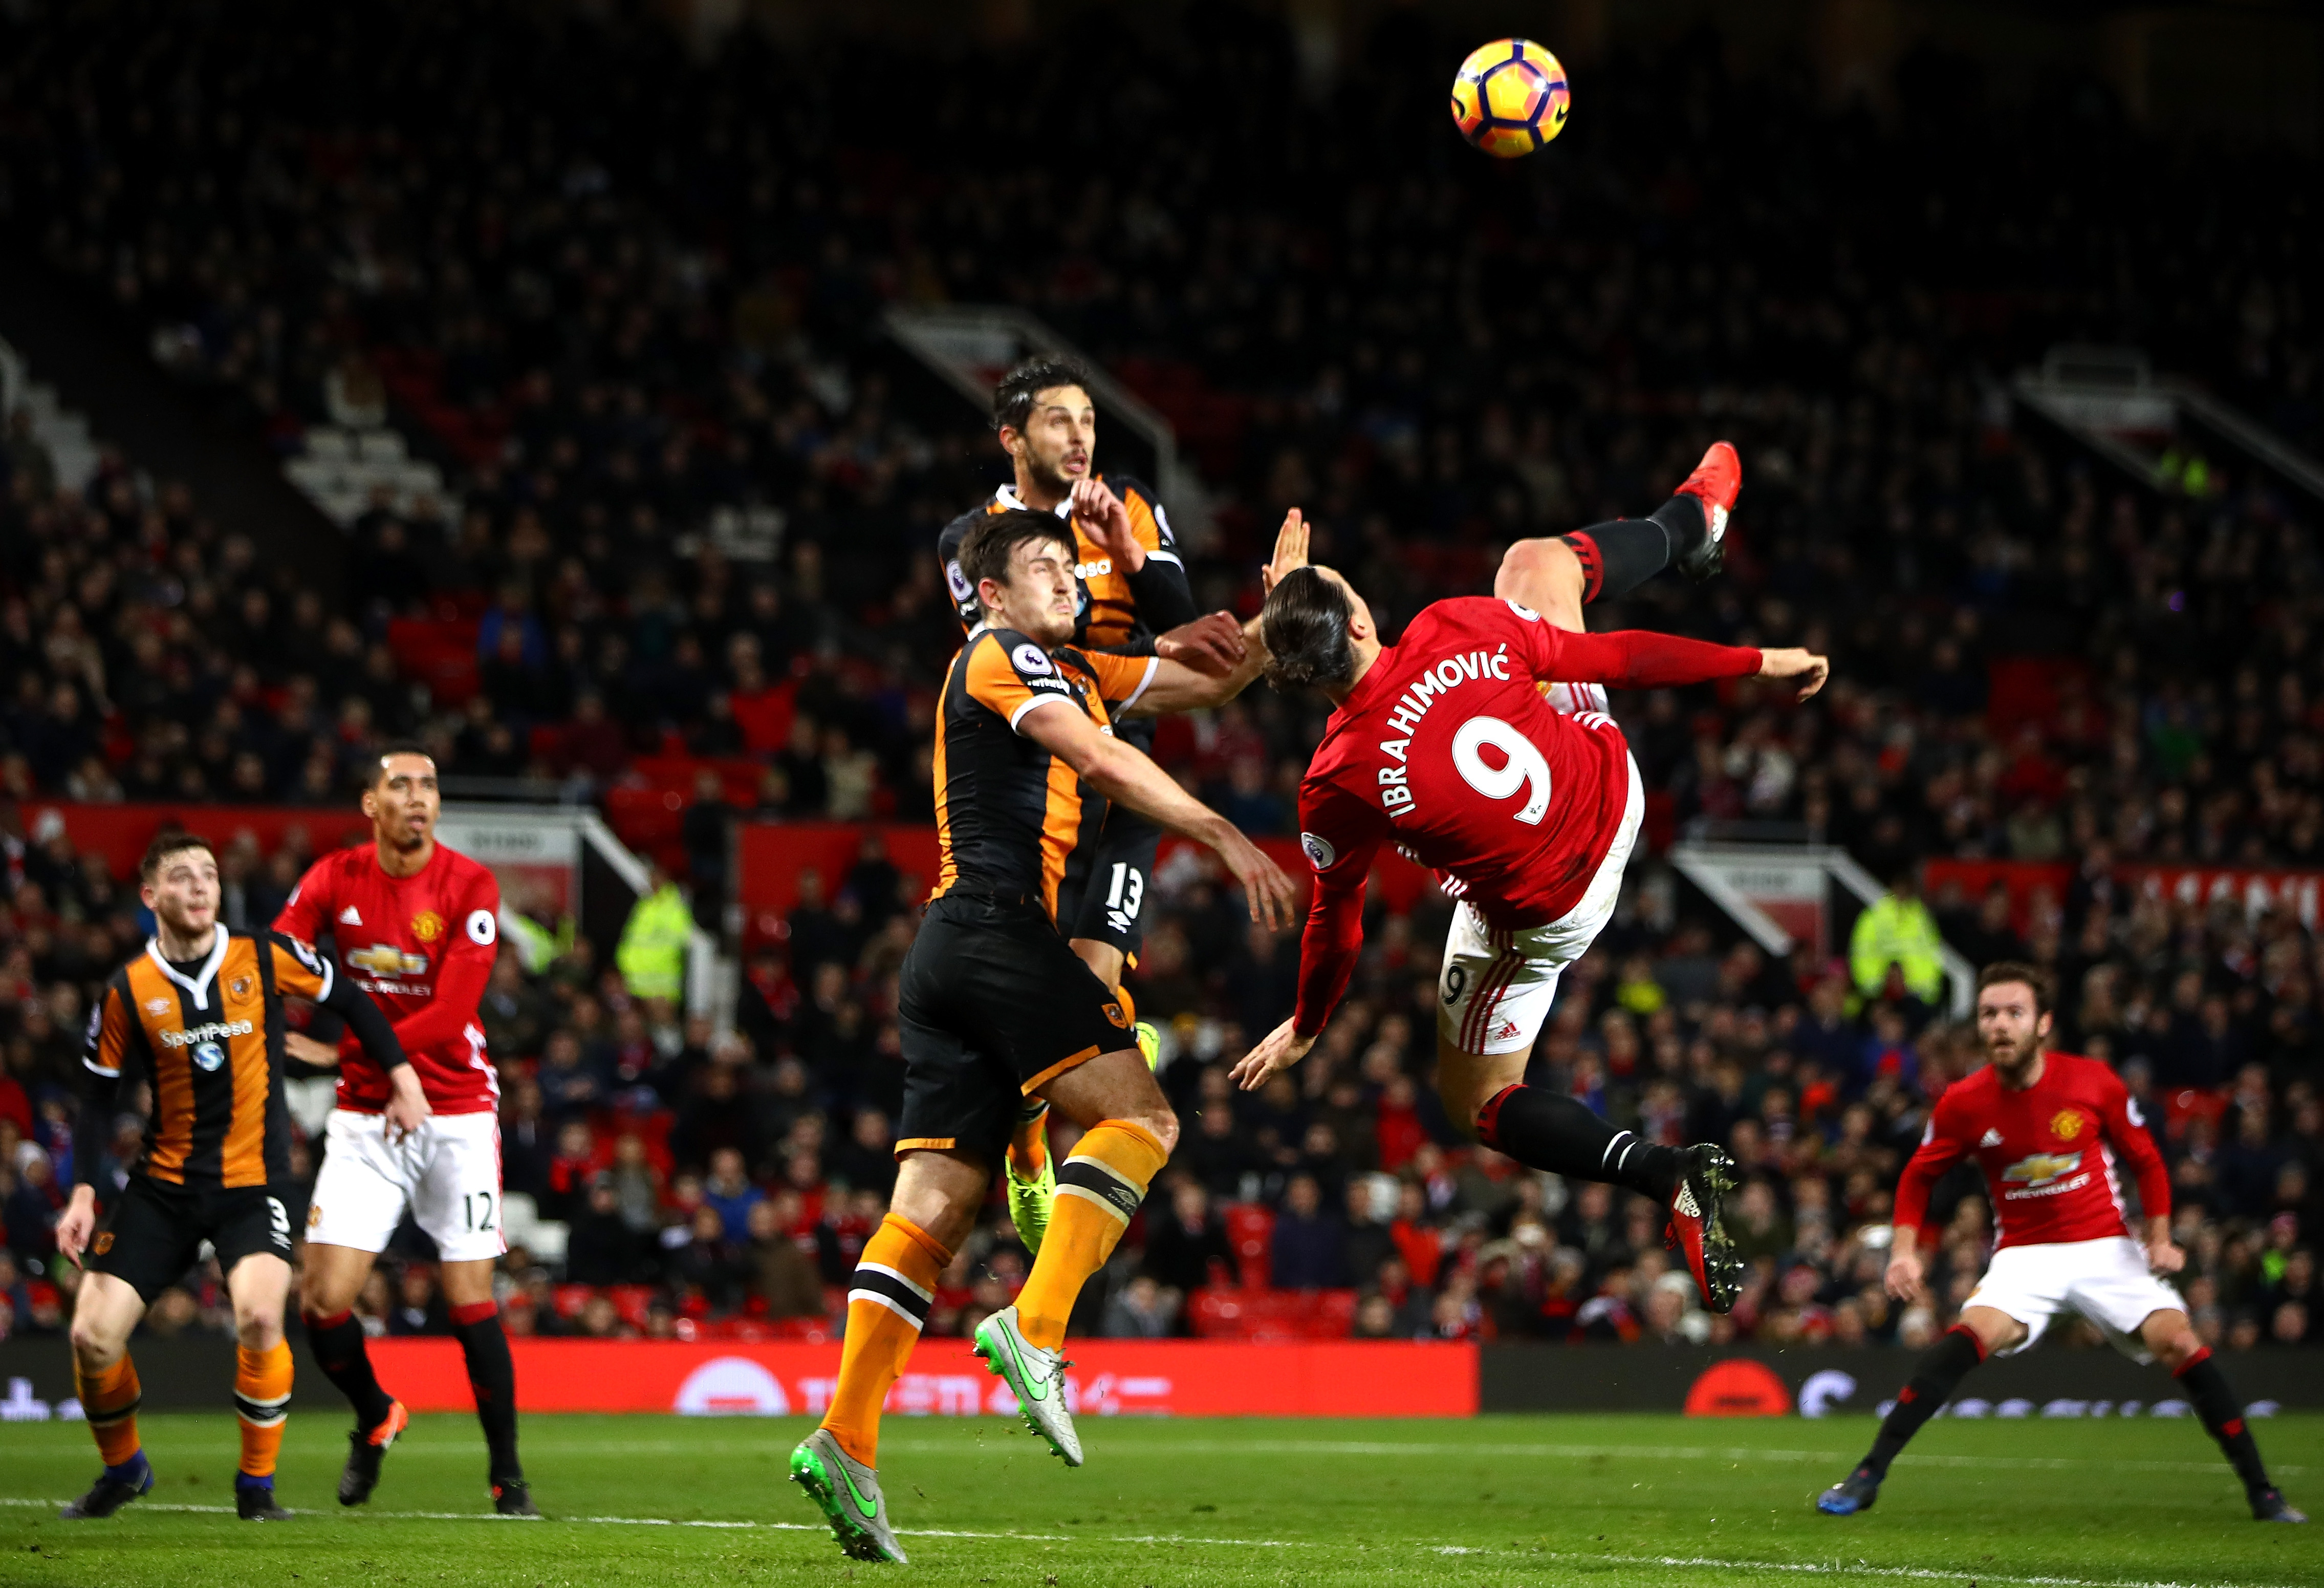 MANCHESTER, ENGLAND - FEBRUARY 01:  Zlatan Ibrahimovic of Manchester United performs an acrobatic kick with Harry Maguire and Andrea Ranocchia of Hull City during the Premier League match between Manchester United and Hull City at Old Trafford on February 1, 2017 in Manchester, England.  (Photo by Clive Mason/Getty Images)